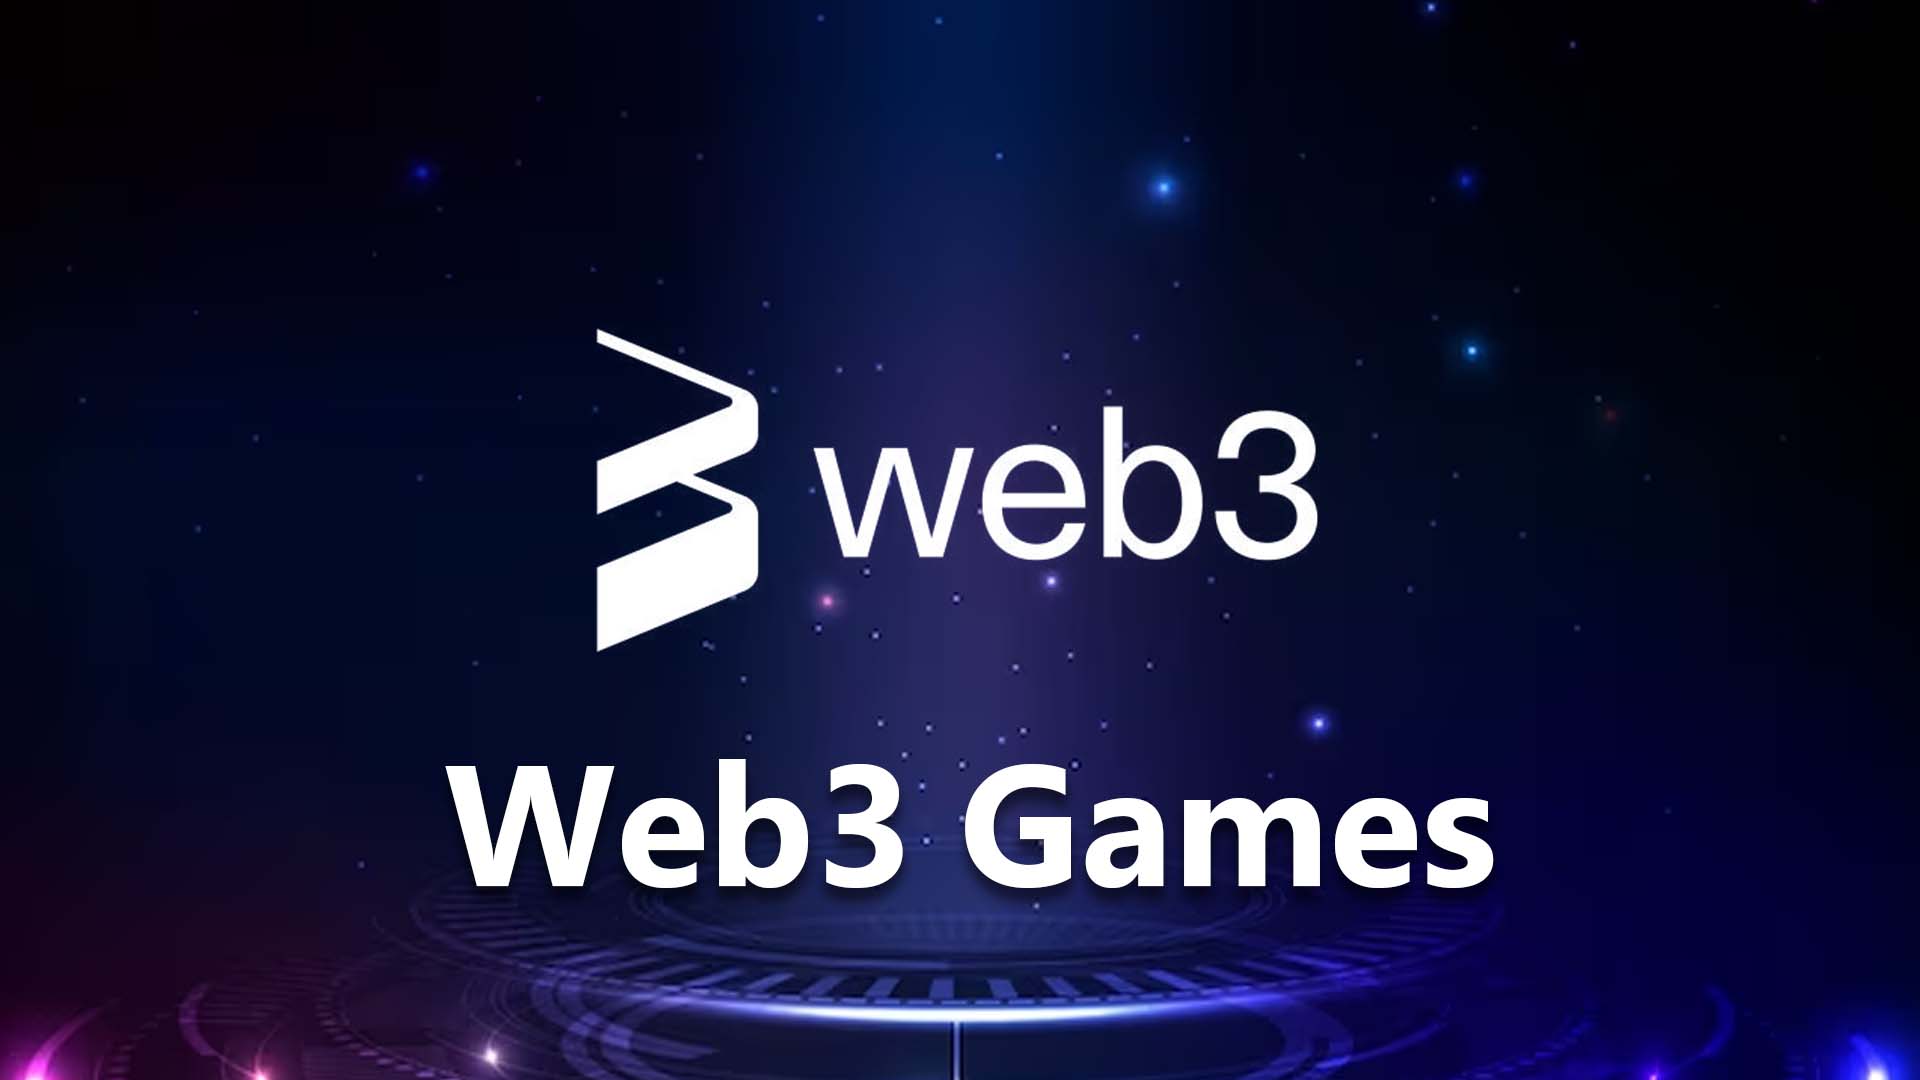 Shape up Gaming Culture with Good Web3 Games